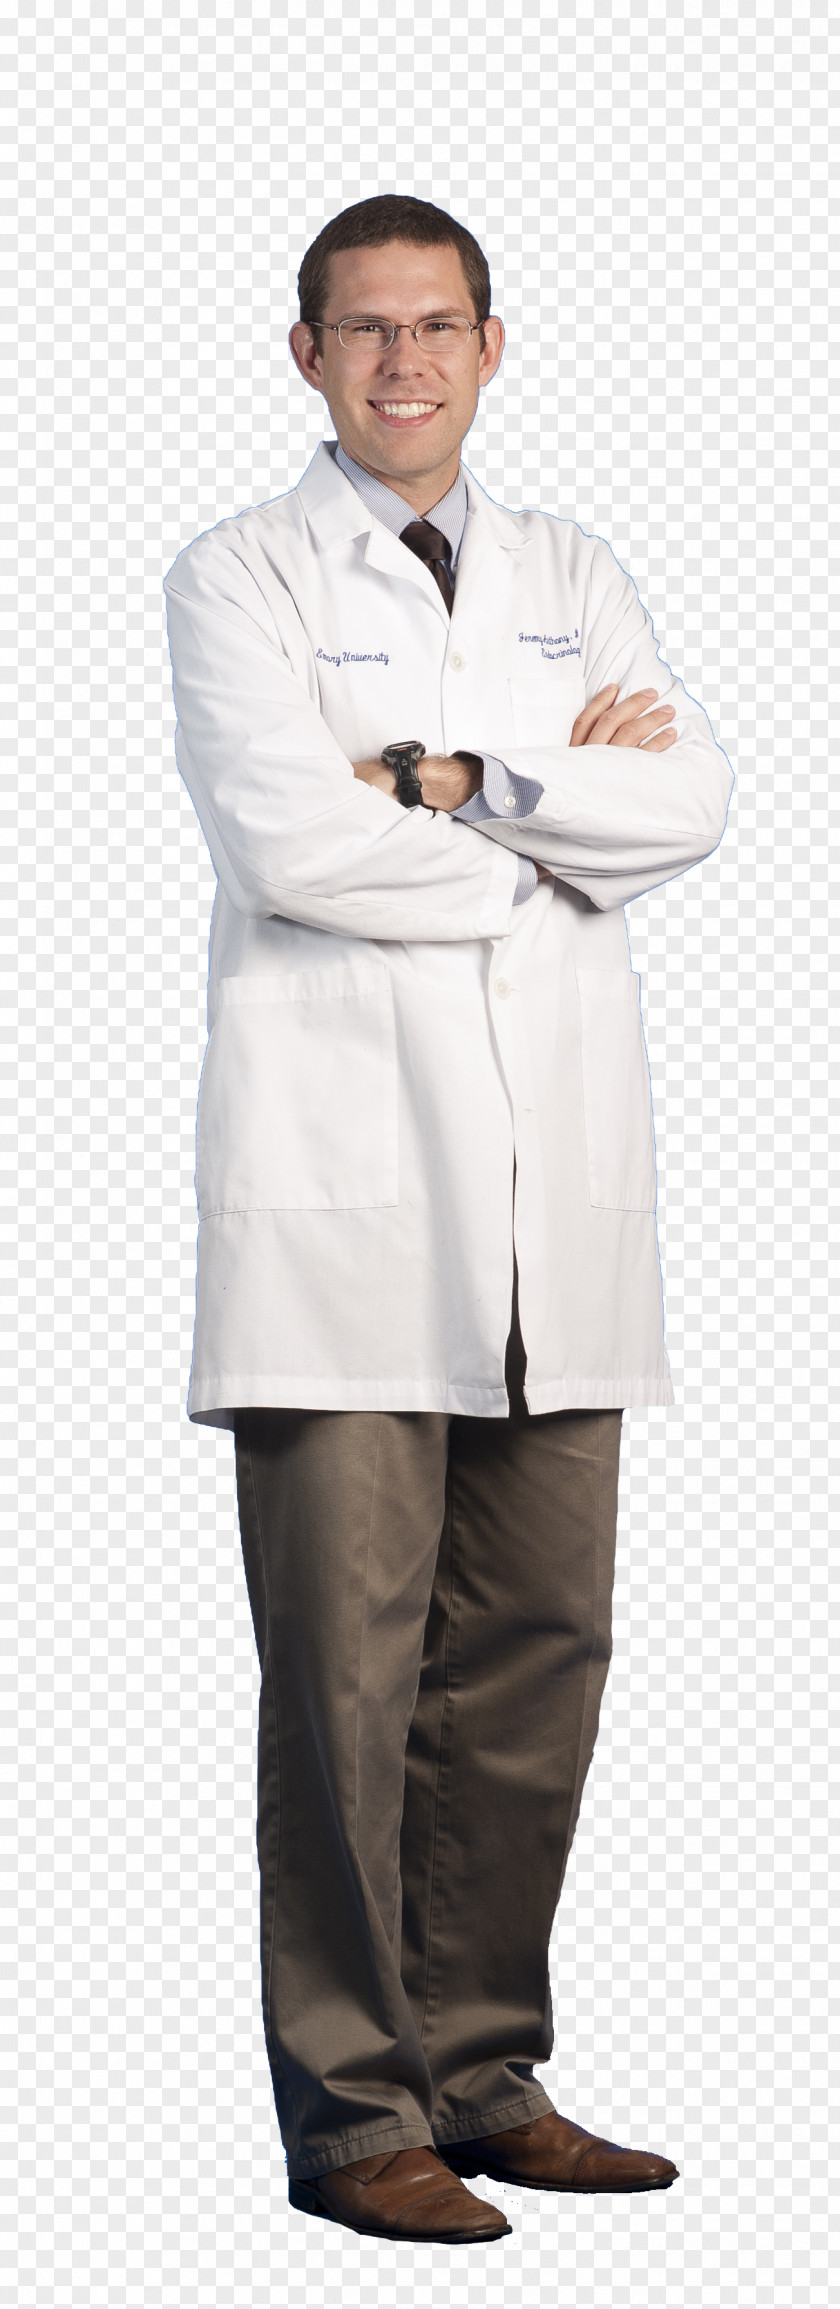 Disturbance Of Flies While Standing Sleeve Chef's Uniform Lab Coats Outerwear PNG